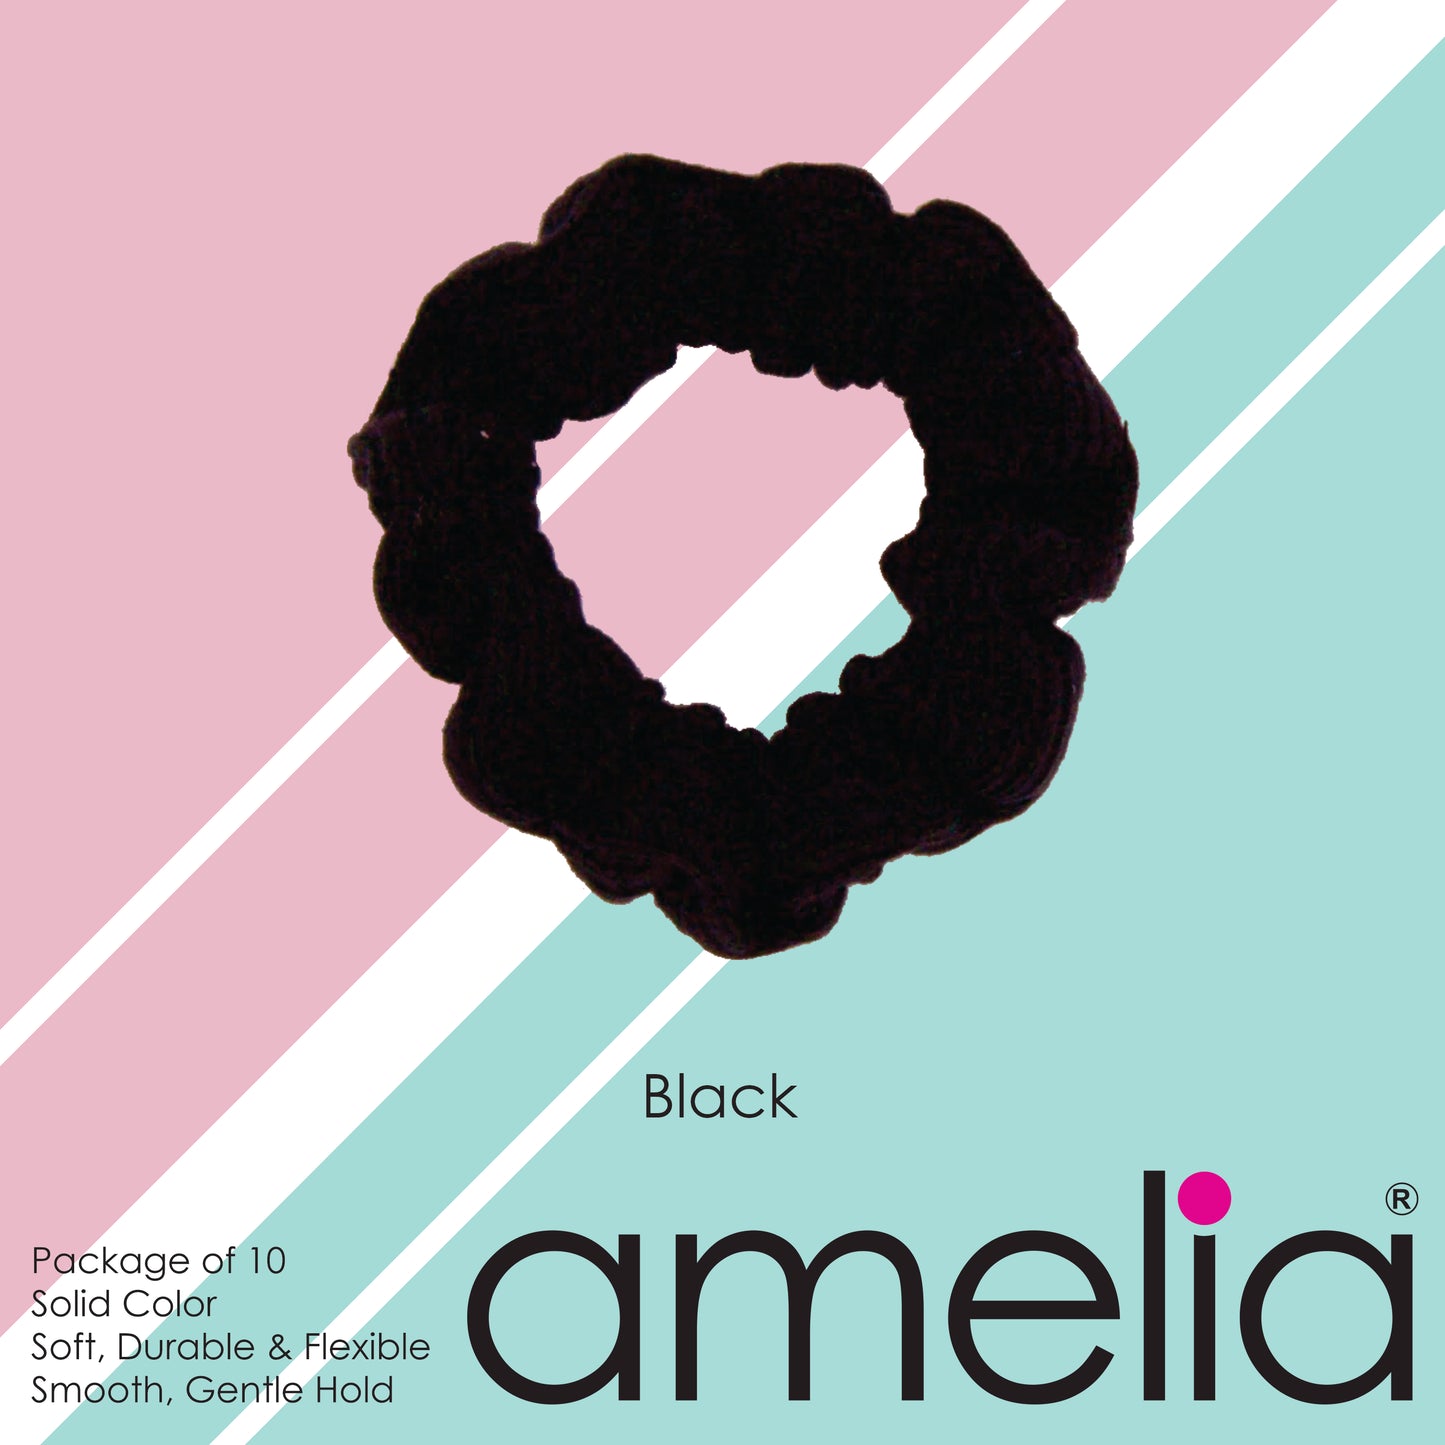 Amelia Beauty, Medium Black Ribbed Scrunchies, 2.5in Diameter, Gentle on Hair, Strong Hold, No Snag, No Dents or Creases. 10 Pack